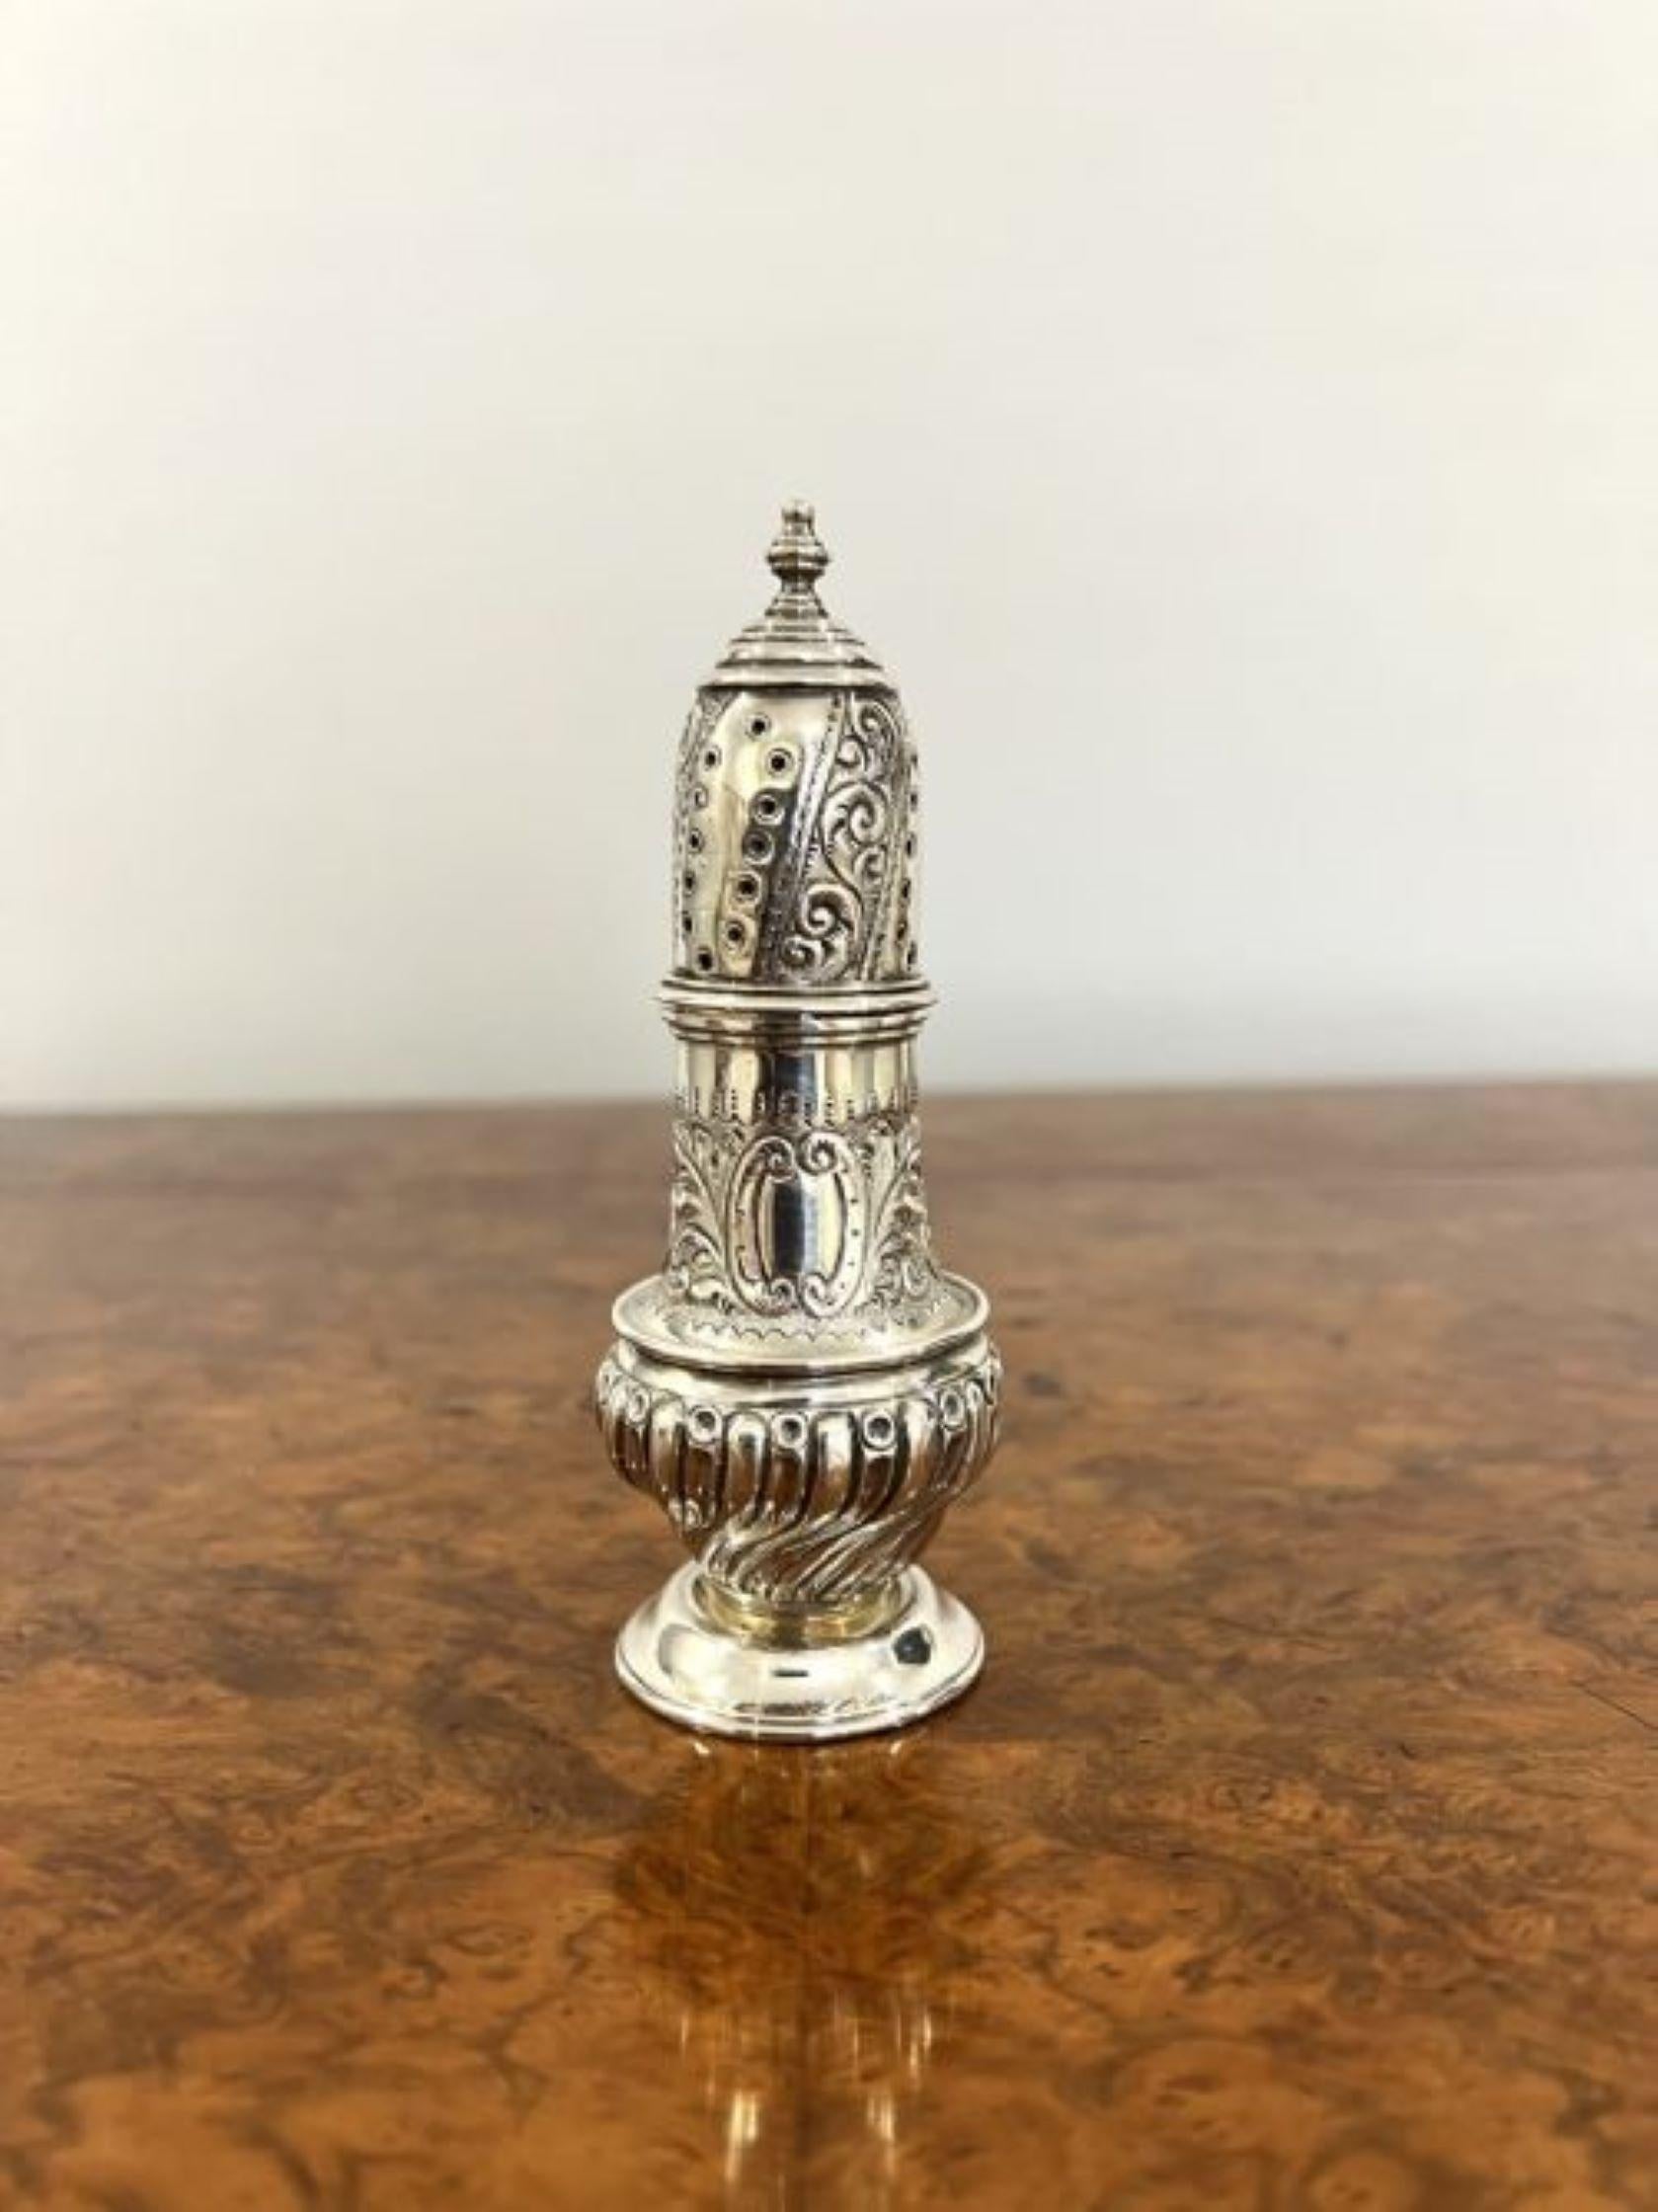 Quality antique Victorian hallmarked solid silver sugar sifter having a quality antique Victorian hallmarked solid silver sugar sifter with a pierced removable top, with detailed leaf and scroll design, part wrythen-fluted, EW, Chester 1895